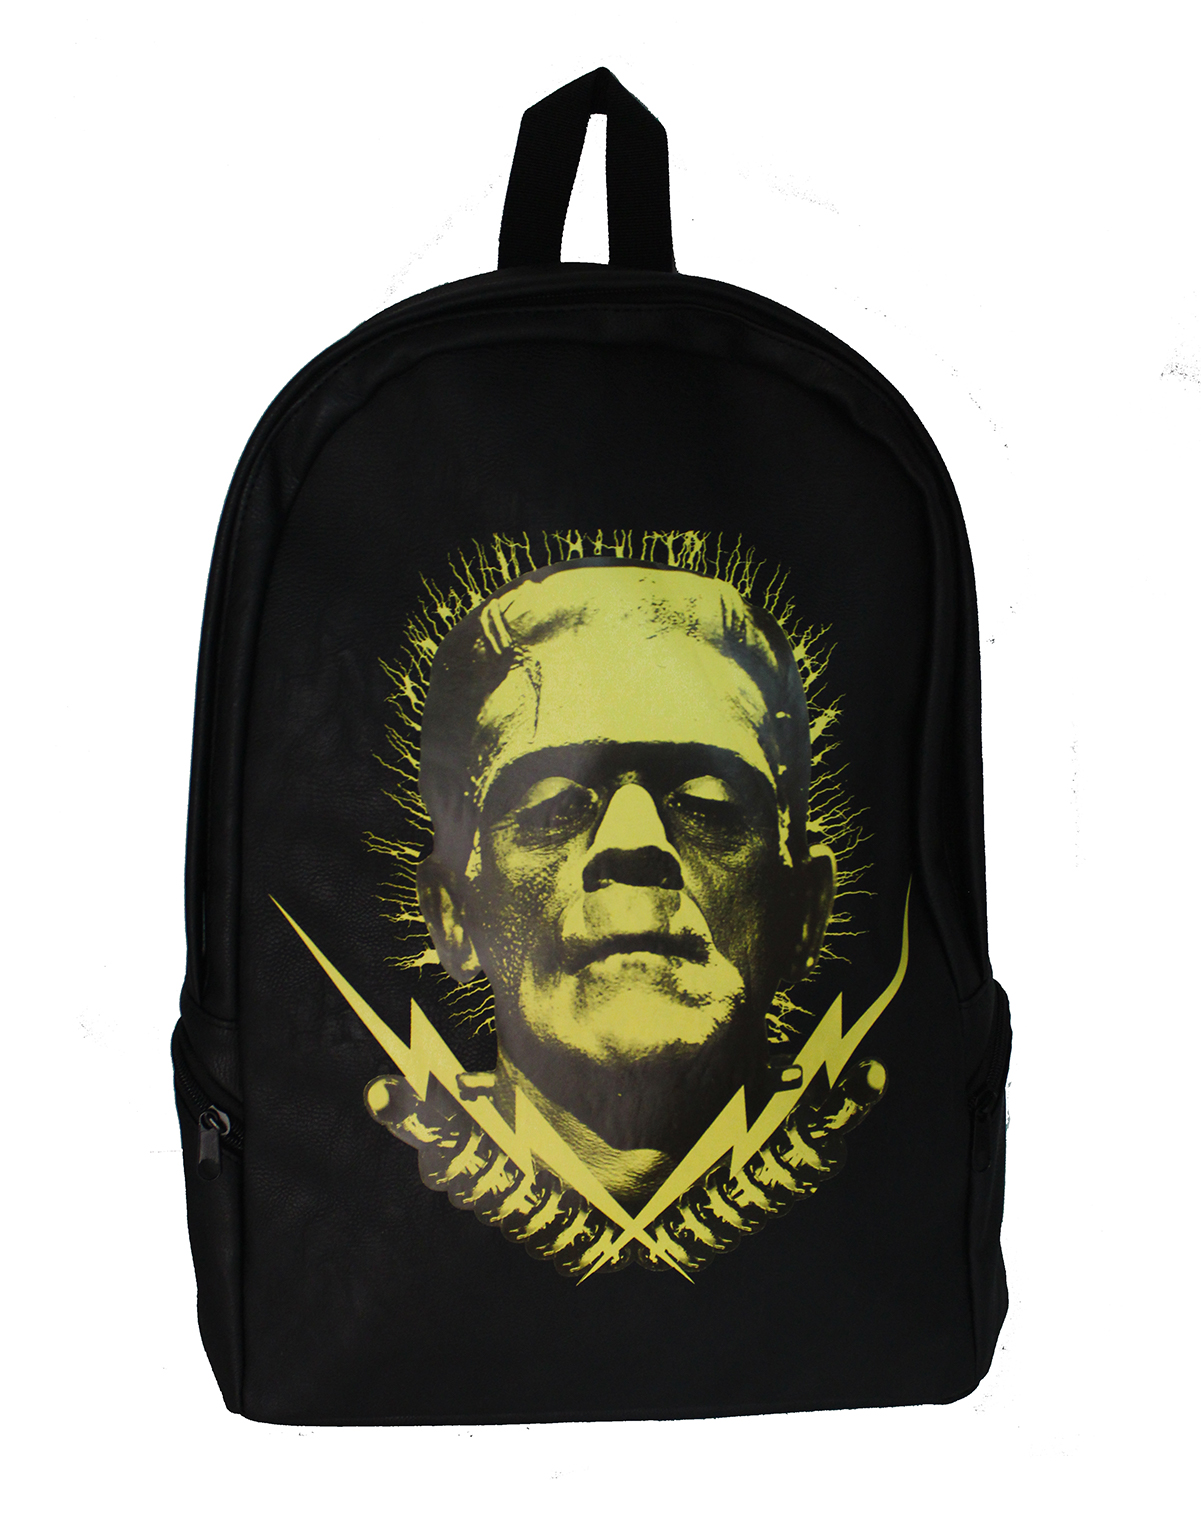 Universal Monsters Gothic Frankenstein Full Size Backpack by Rock Rebel - image 1 of 1